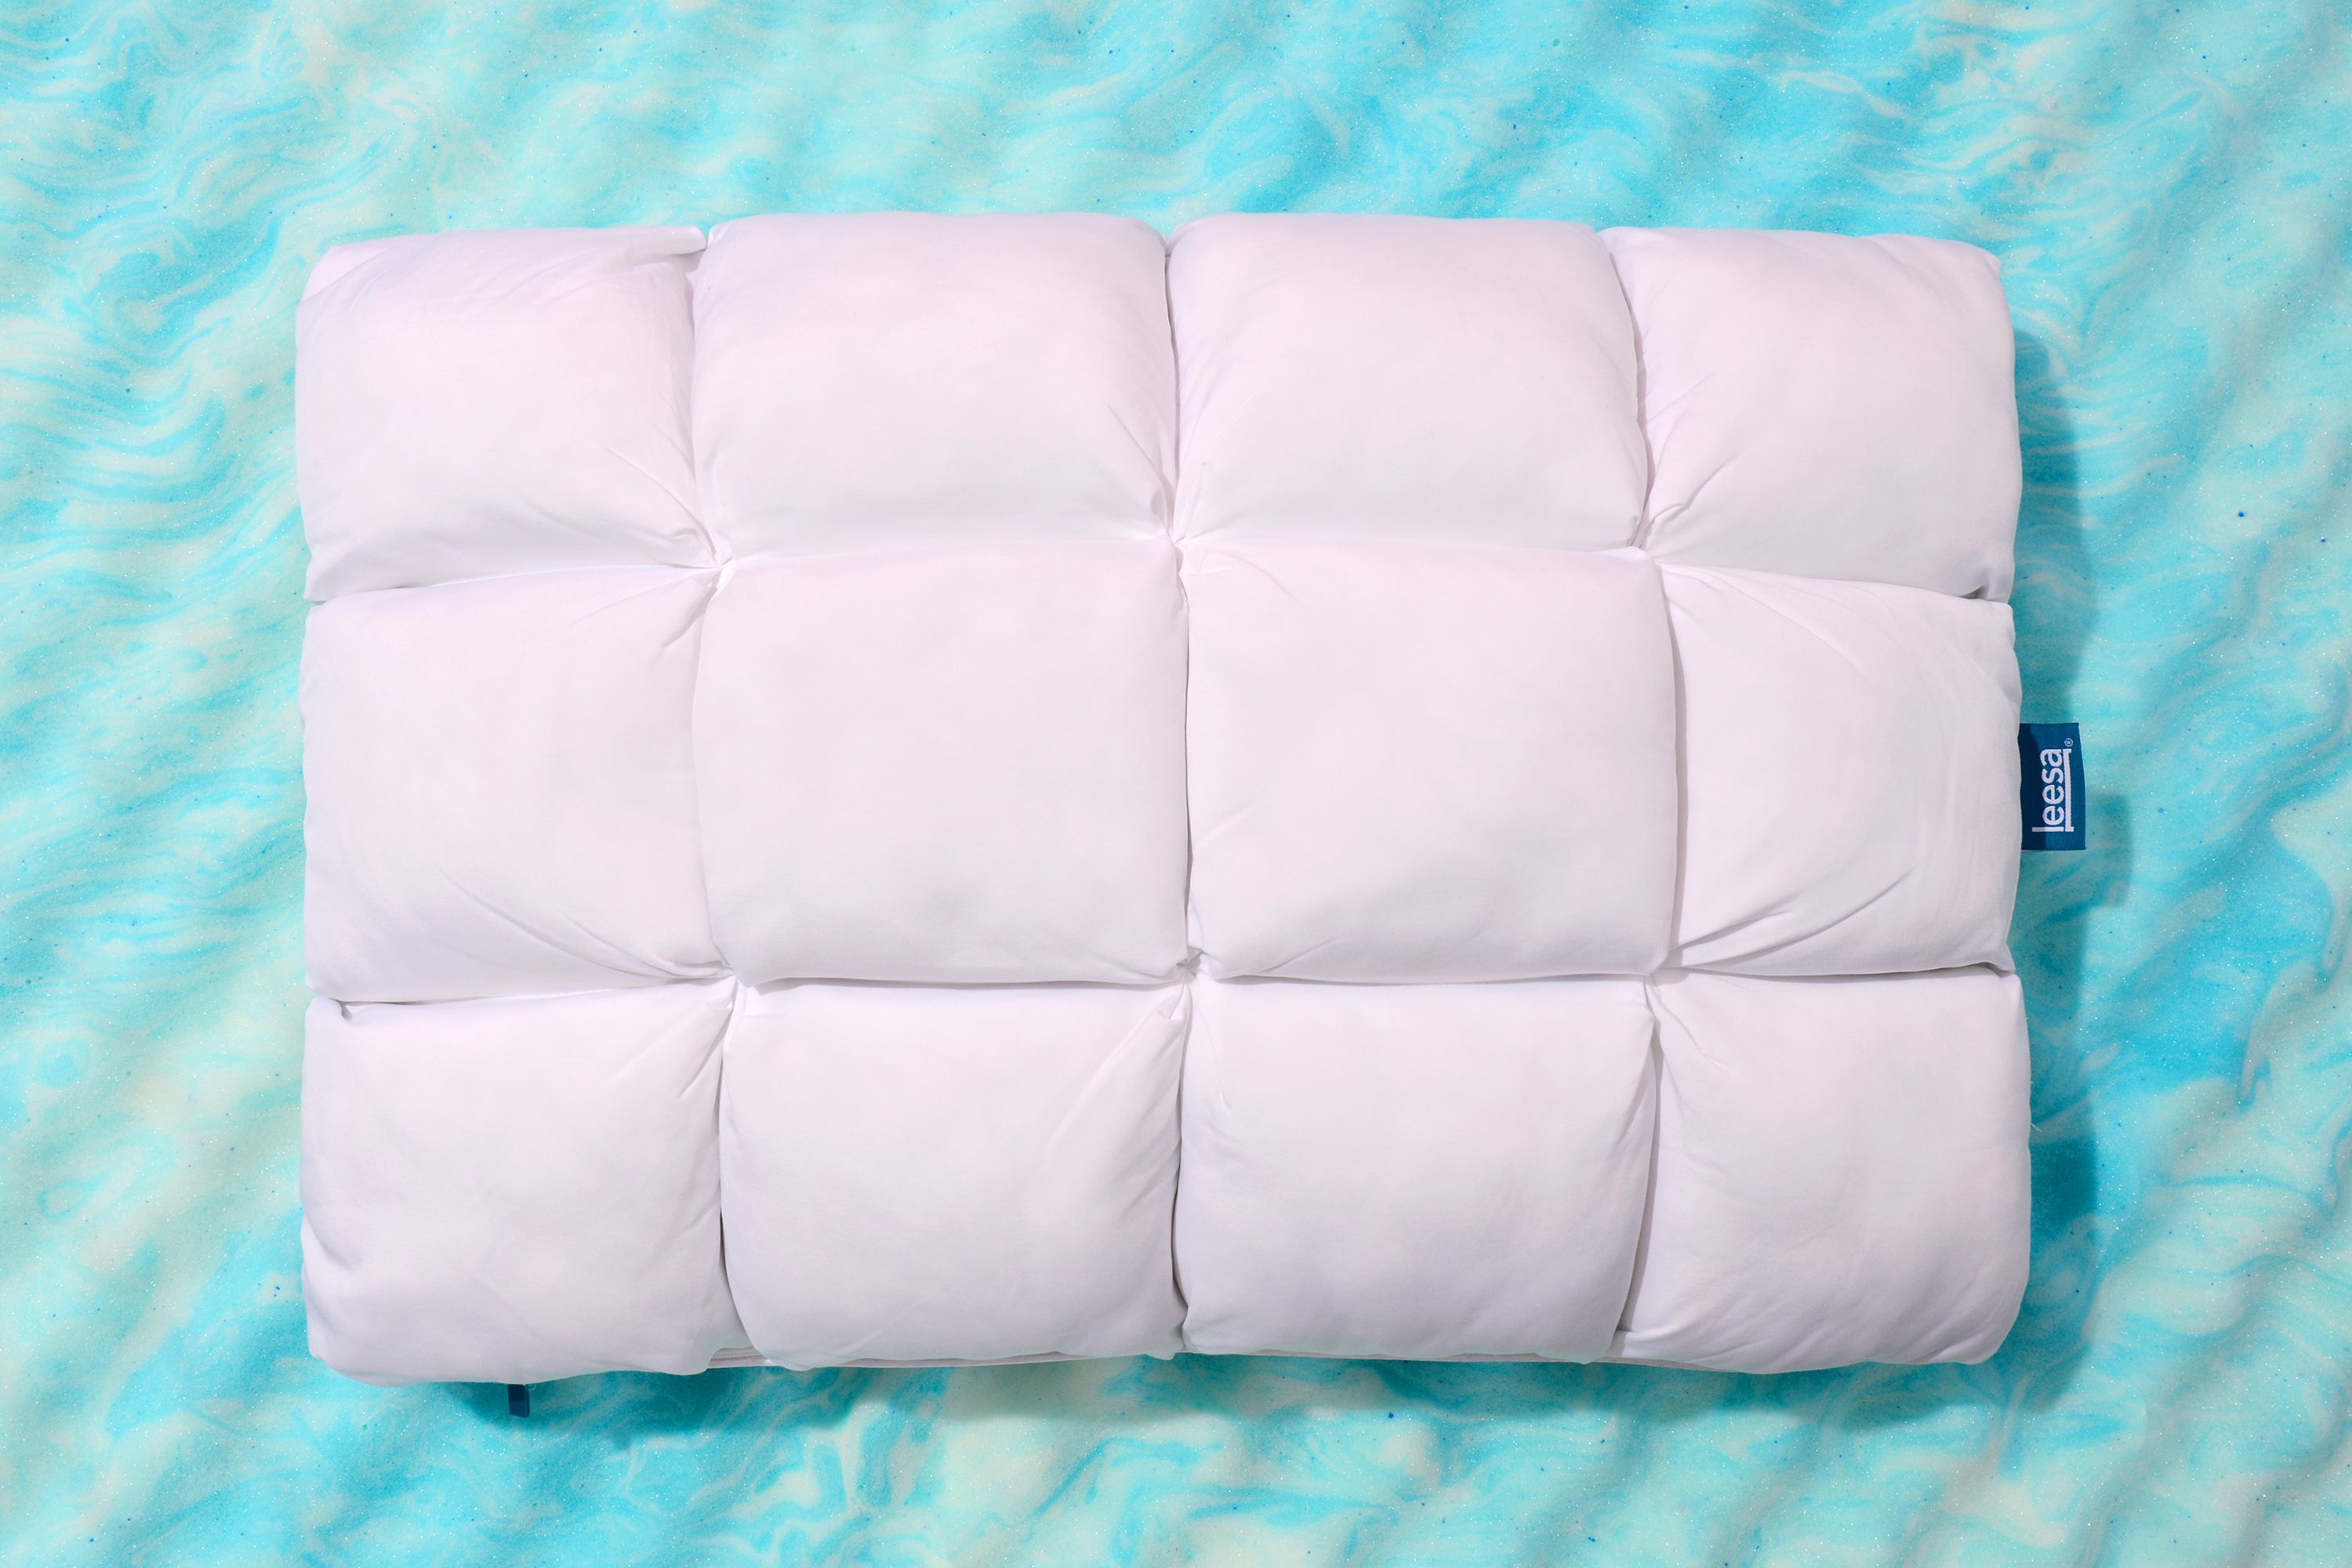 icy cool pillow